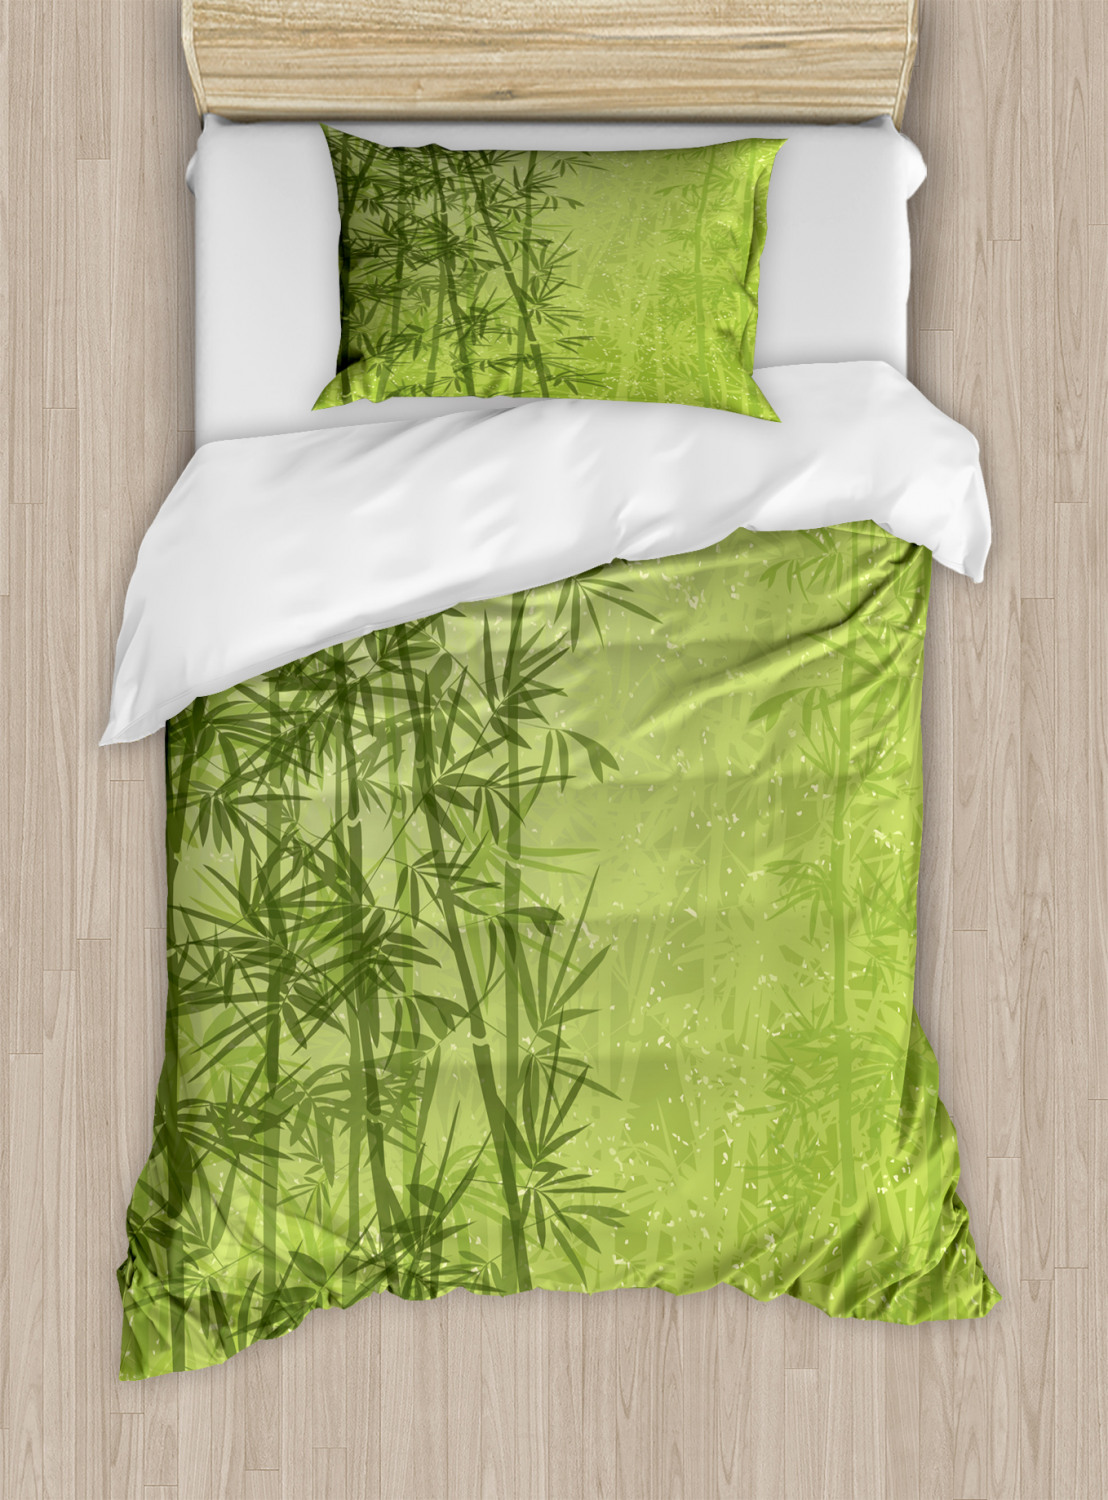 Bamboo Duvet Cover Set Twin Queen King Sizes with Pillow